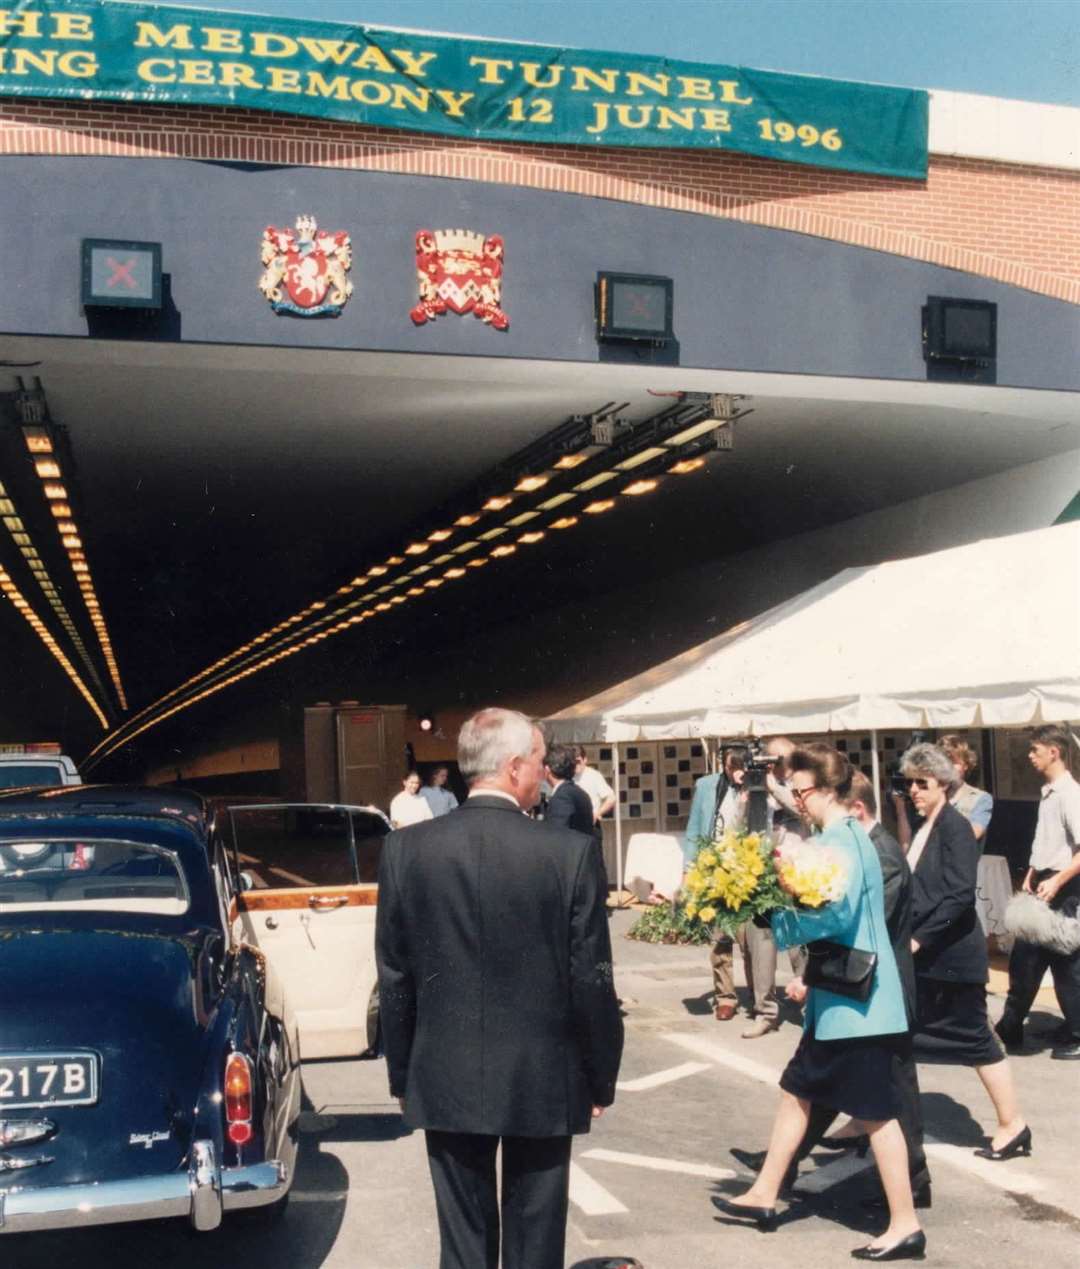 Princess Anne at the opening ceremony of the Medway Tunnel, linking Strood with Chatham, on June 12, 1996